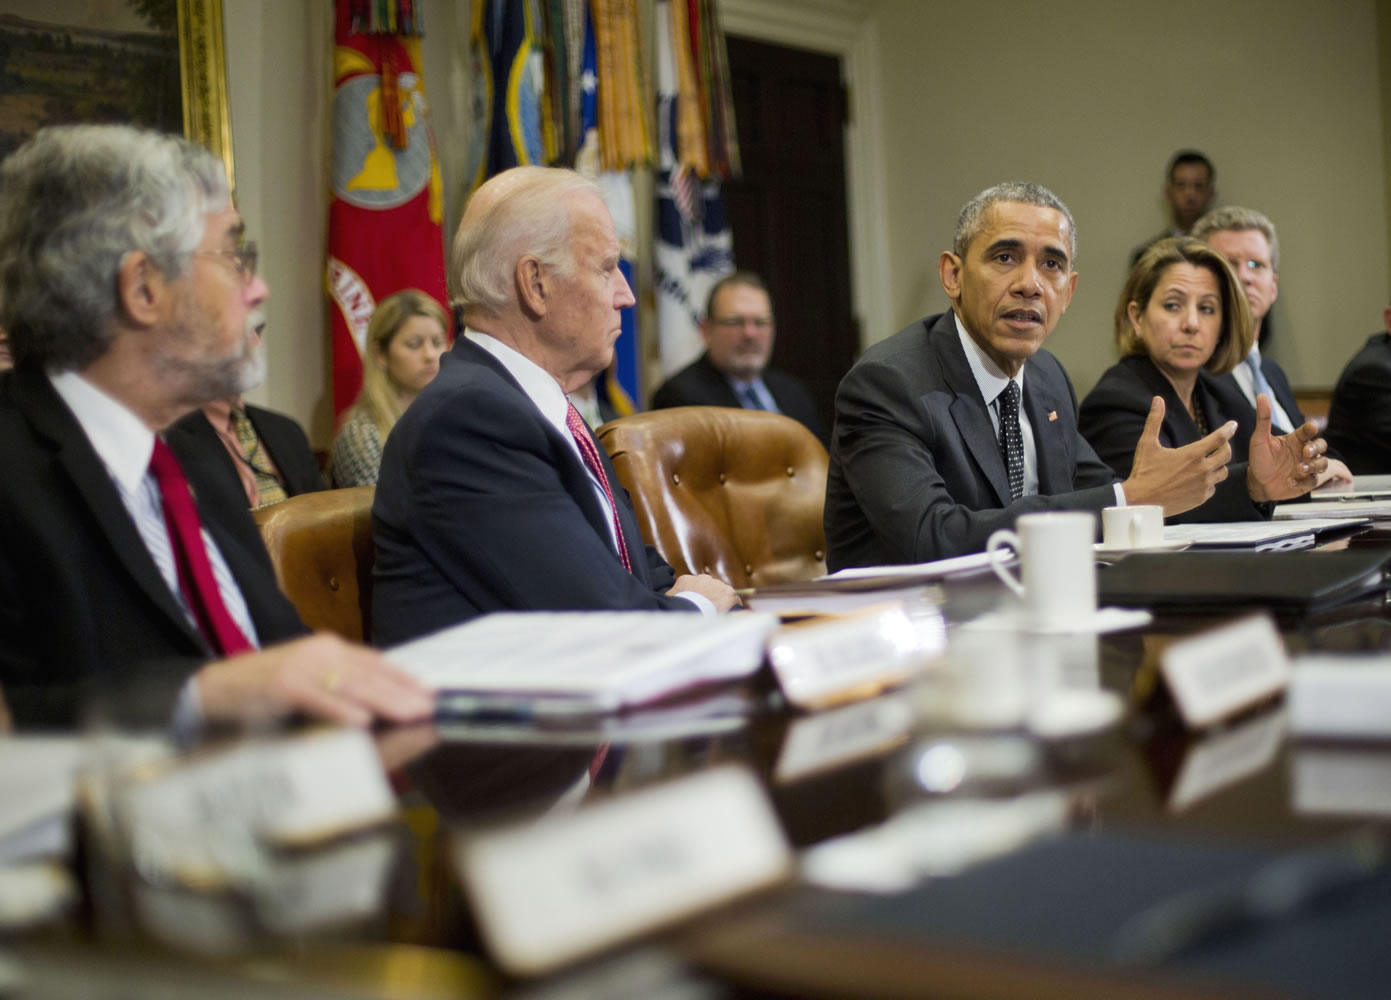 President Barack Obama meets with members of this national security team and cybersecurity advisers in the Roosevelt Room of the White House in Washington,= on Tuesday. From left are, John P. Holdren, Assistant to the President for Science and Technology and Director of the White House Office of Science and Technology Policy, Vice President Joe Biden, Lisa Monaco, Assistant to the President for Homeland Security and Counterterrorism and Budget Director Shaun Donovan.